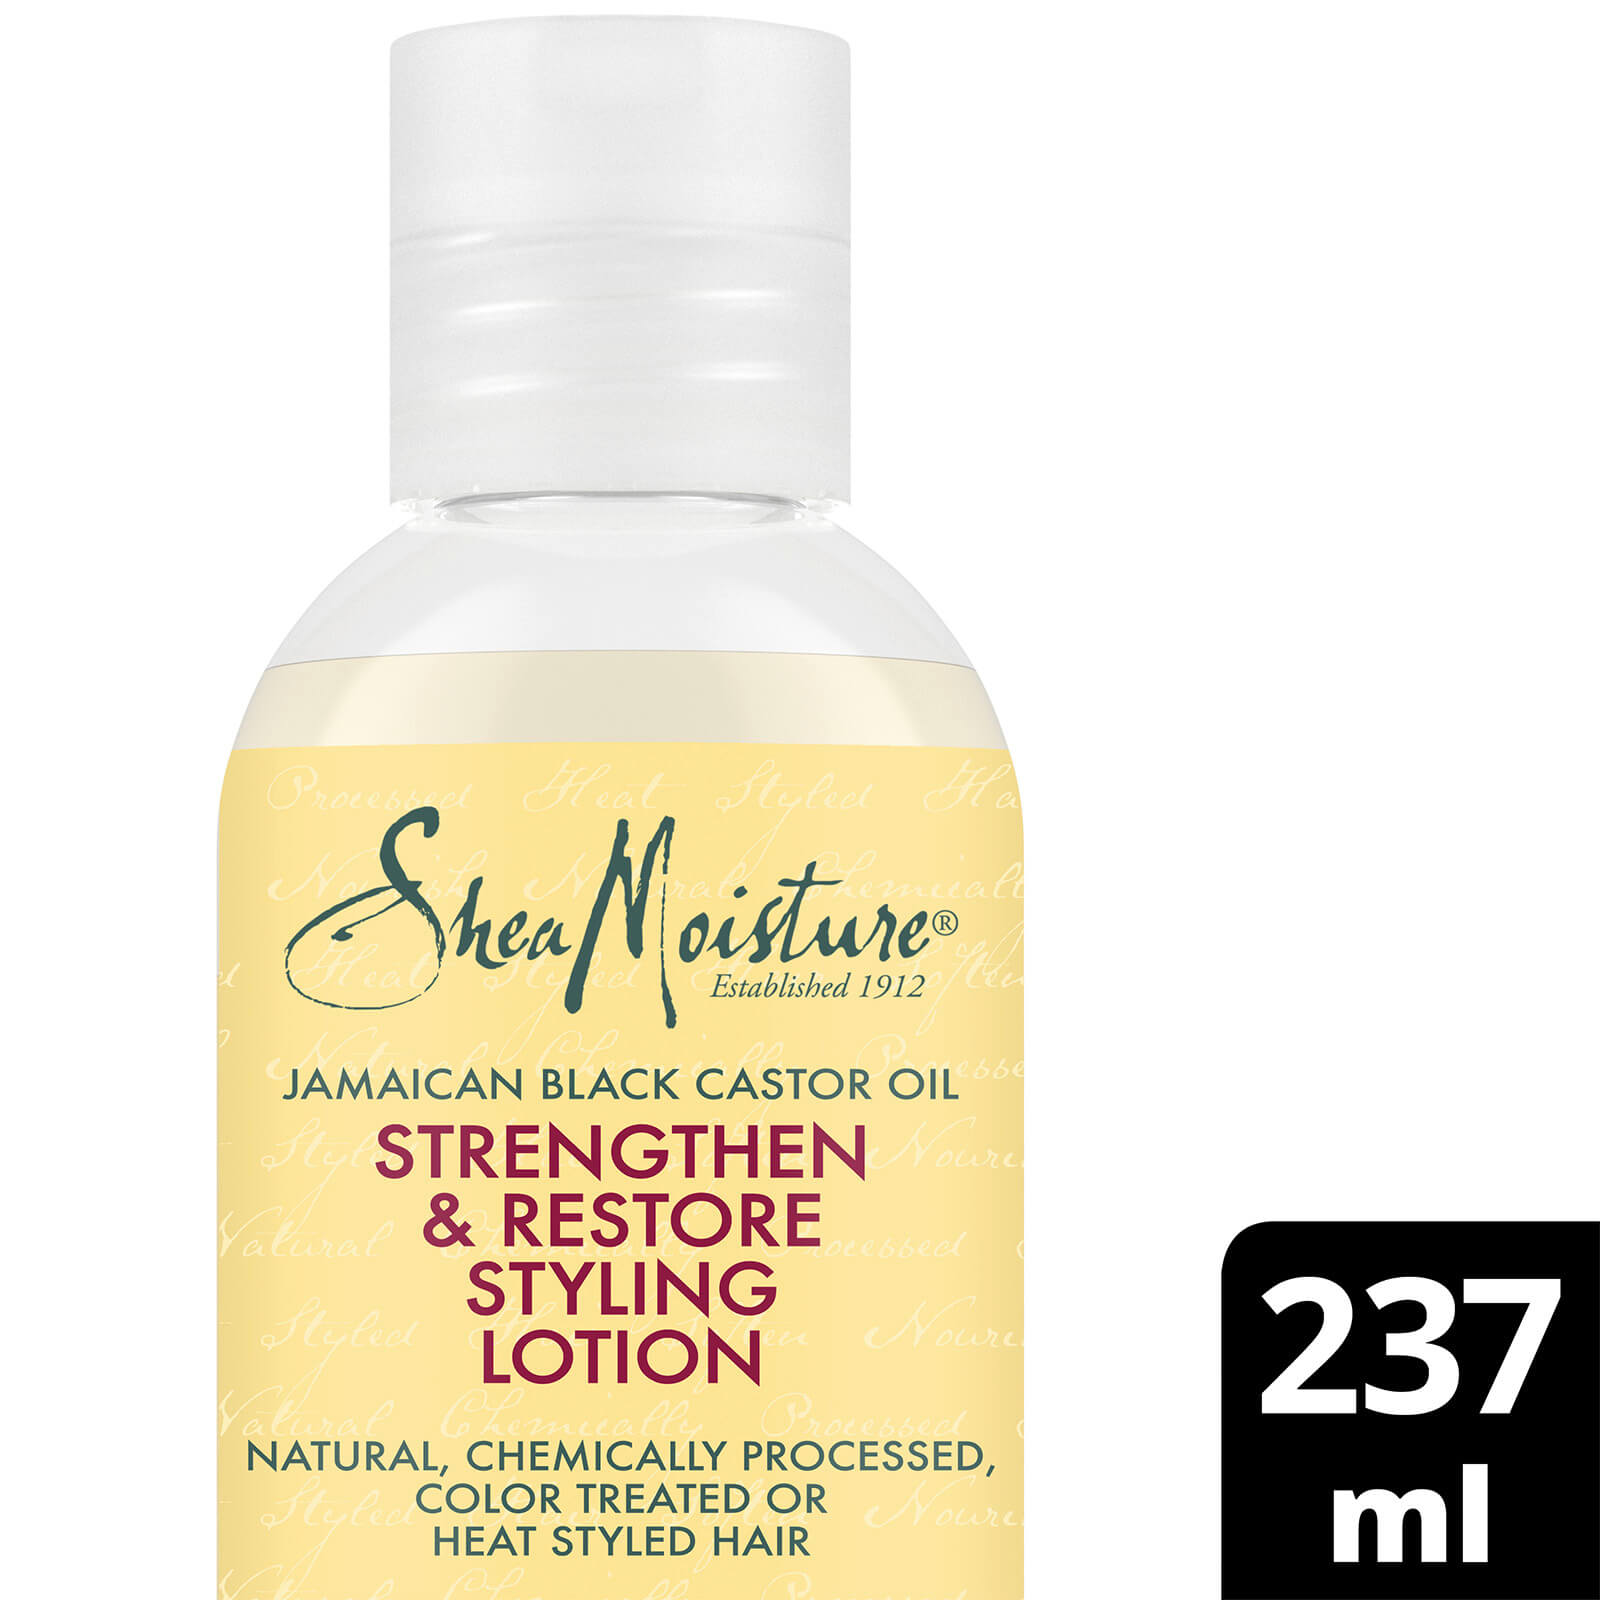 Sheamoisture Shea Moisture Jamaican Black Castor Oil Strengthen And Restore Styling Lotion 237ml In White